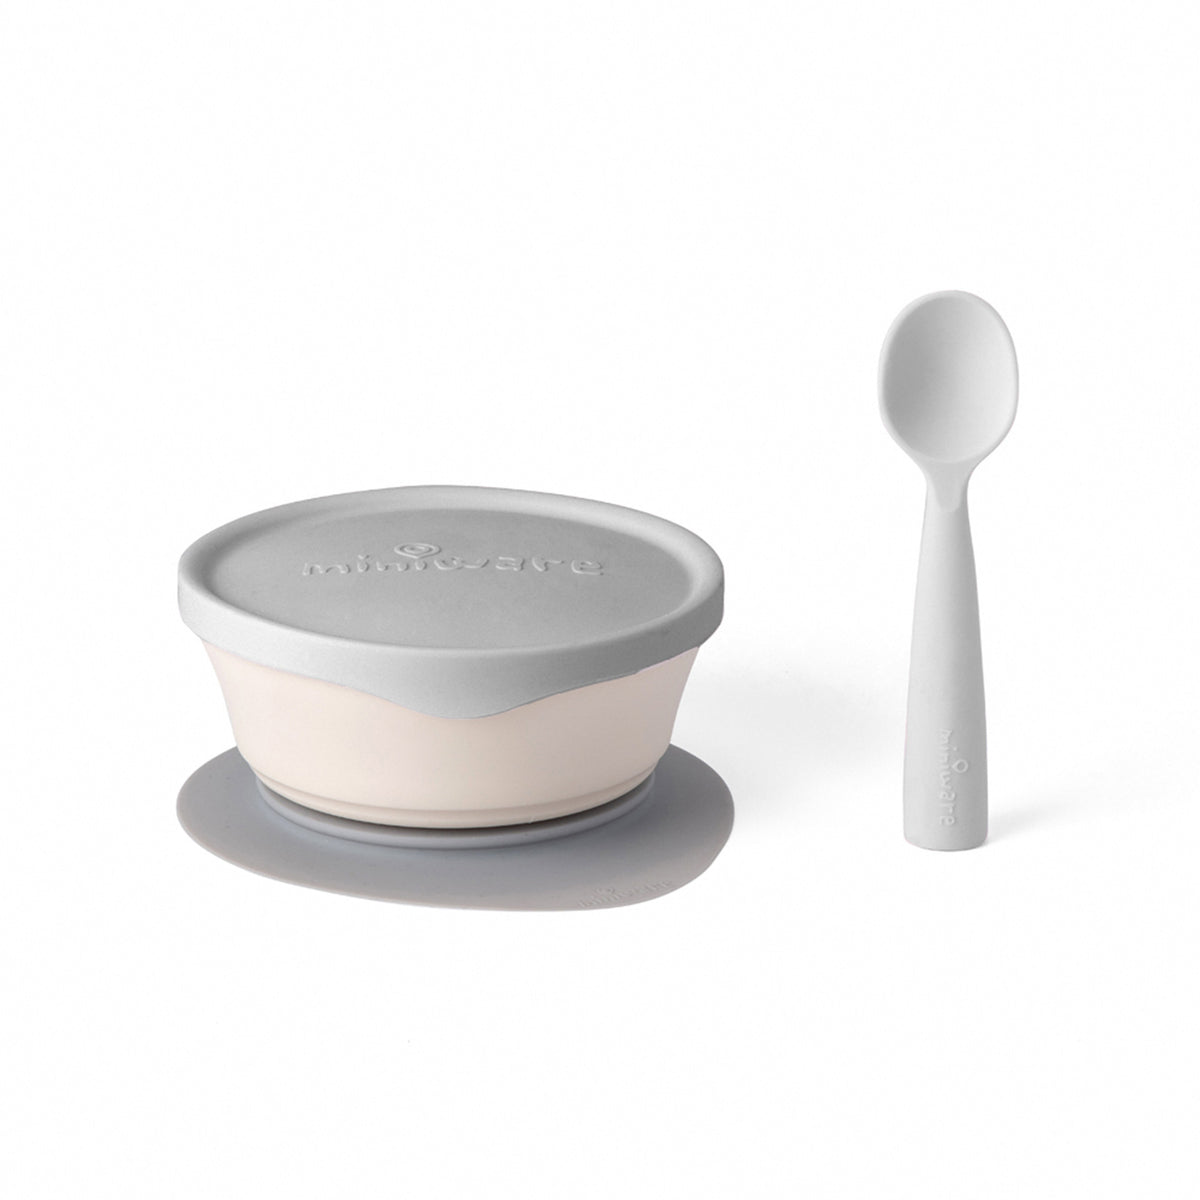 miniware-first-bite-set-pla-cereal-suction-bowl-vanilla-+-silicone-spoon-and-cover-in-cotton-grey- (2)